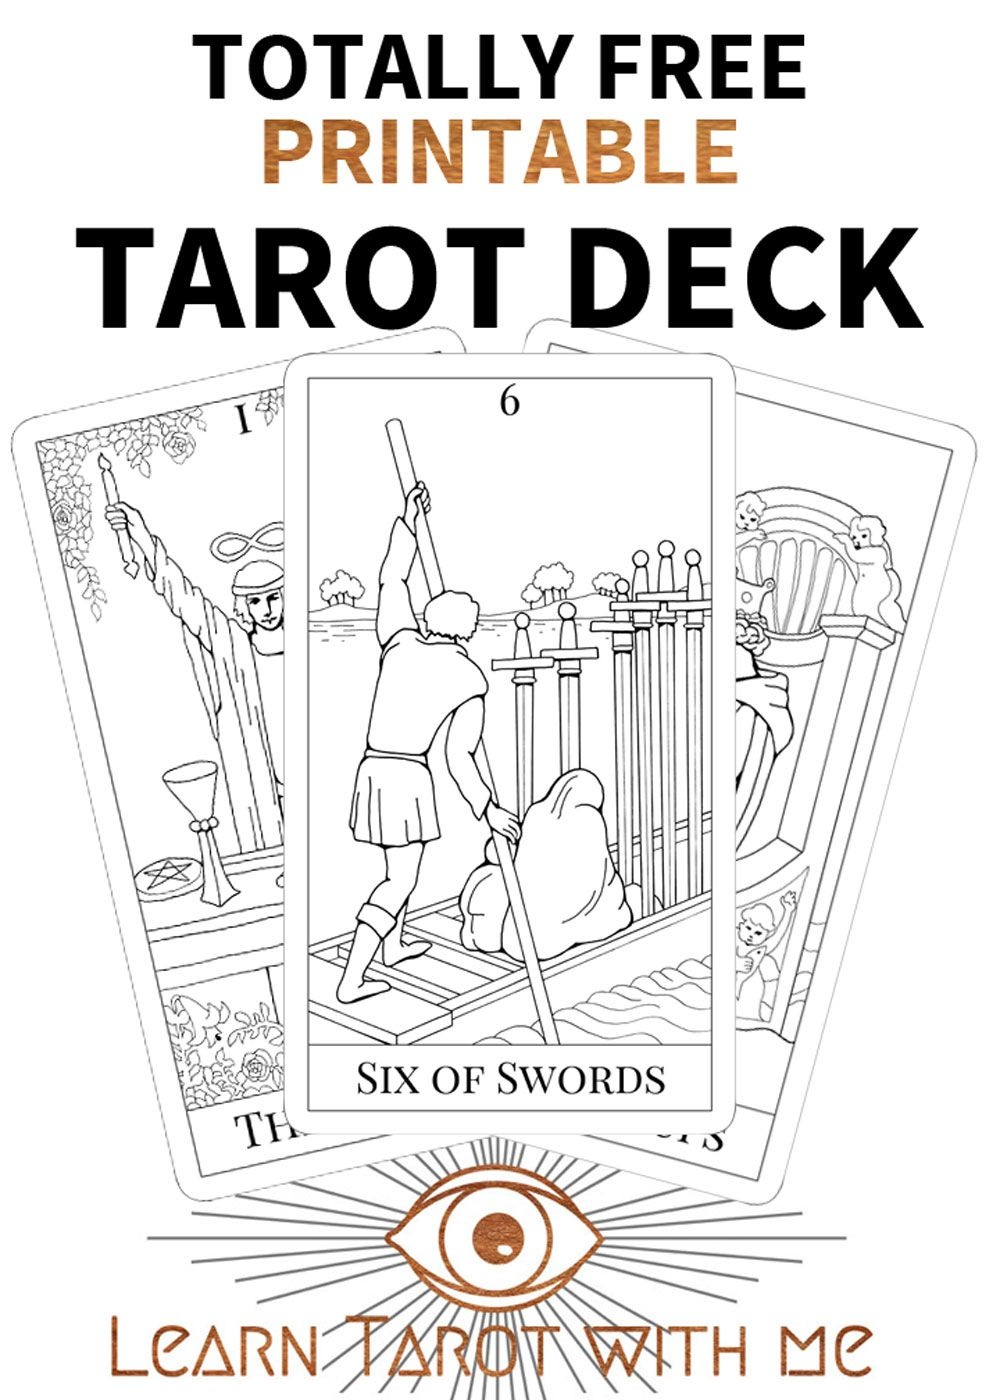 Printable Tarot Deck From | Learning Tarot | Free Tarot Cards, Tarot - Free Printable Tarot Cards